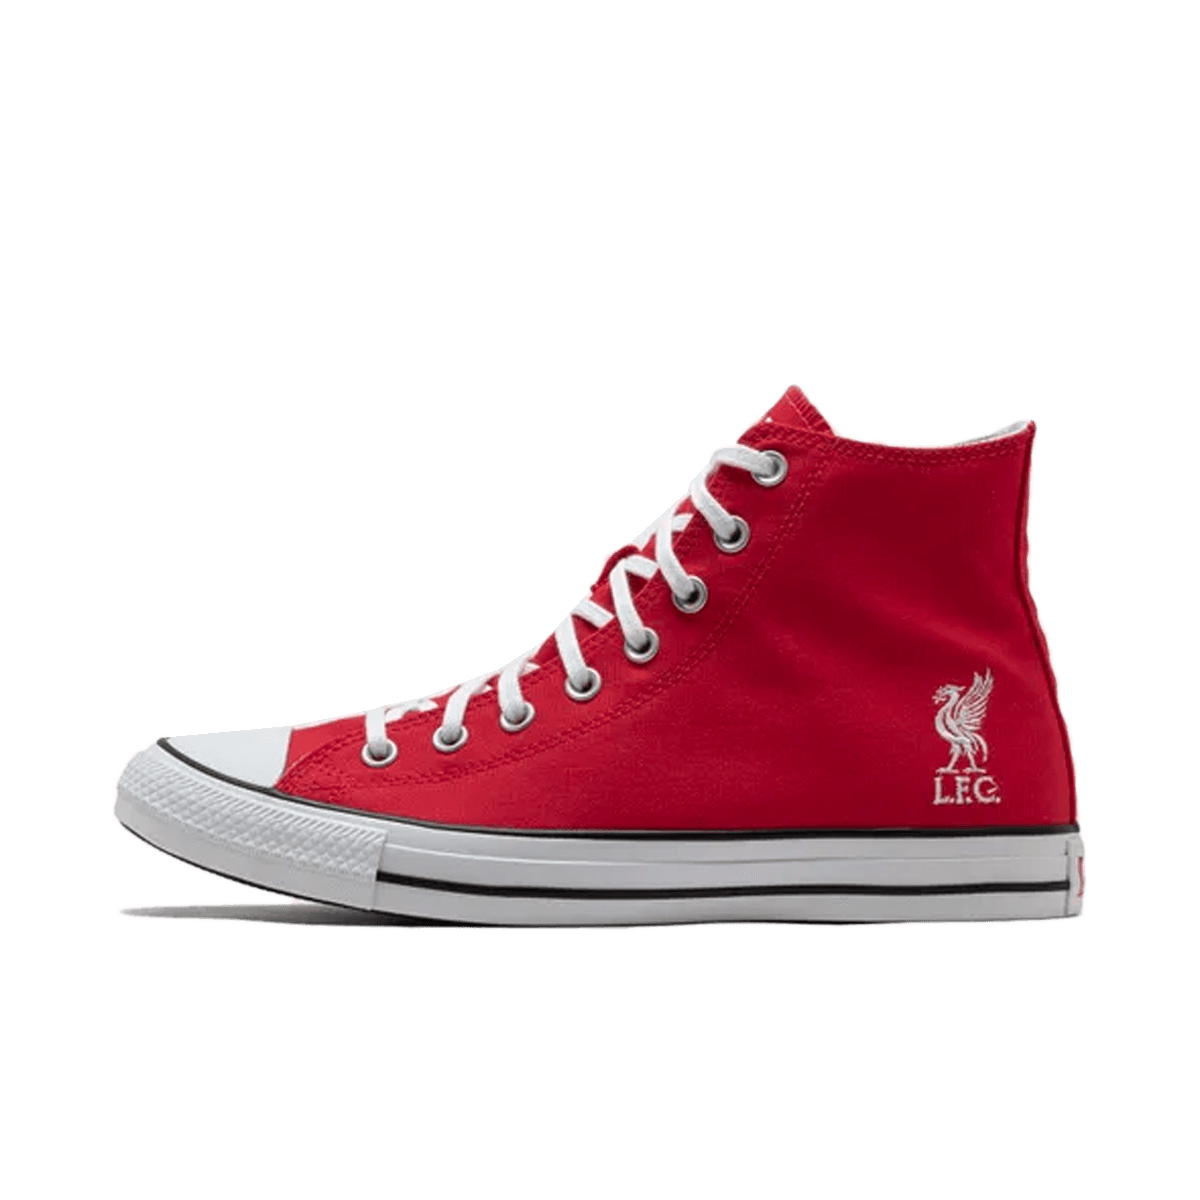 Liverpool FC x Converse Chuck Taylor All Star 'Red'